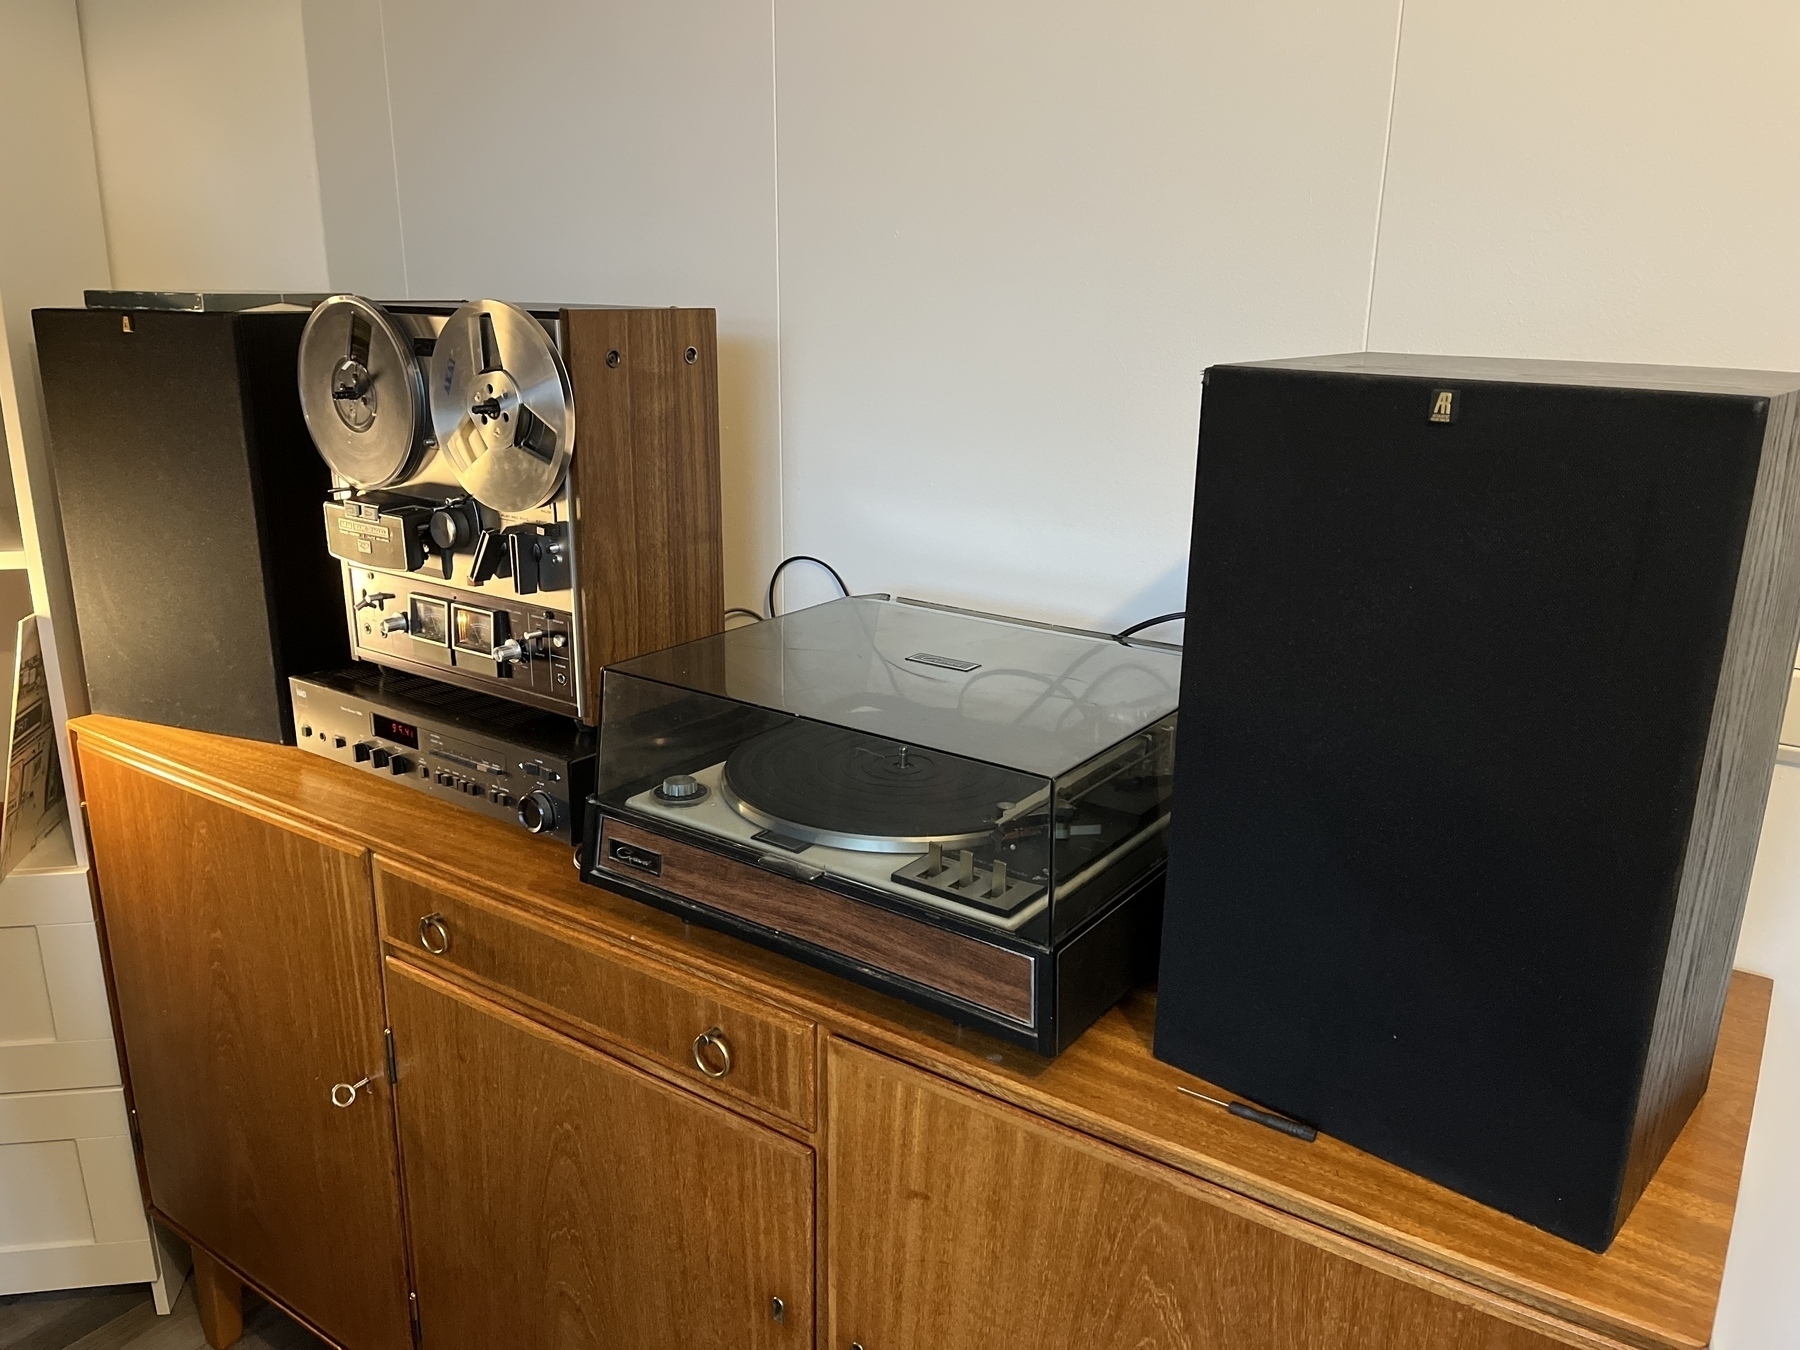 A fifty year record player, next to a fifty year reel-to-reel tape deck. Both in perfect working order.